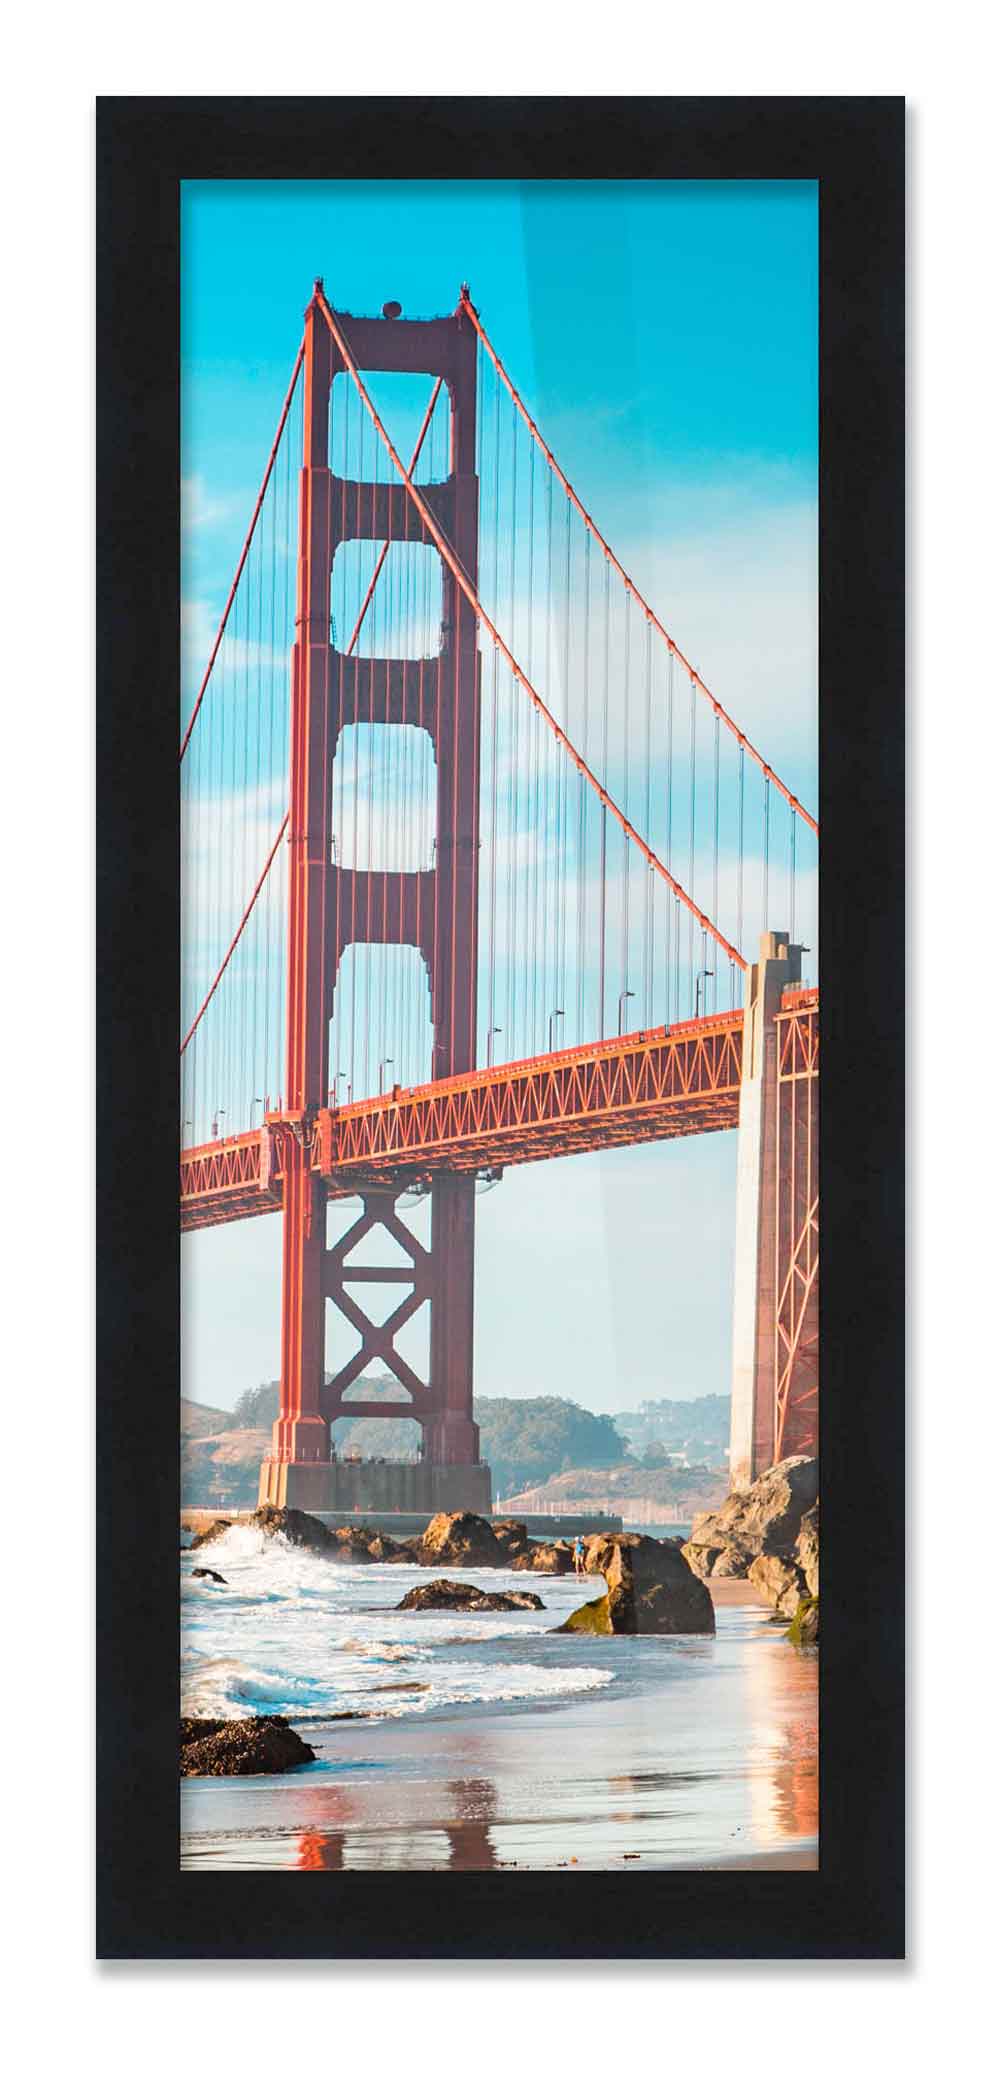 CustomPictureFrames.com 5x20 In Frame Black Picture Frame - Complete Modern Photo Frame Includes UV Acrylic Shatter Guard Front, Acid Free Foam Backing